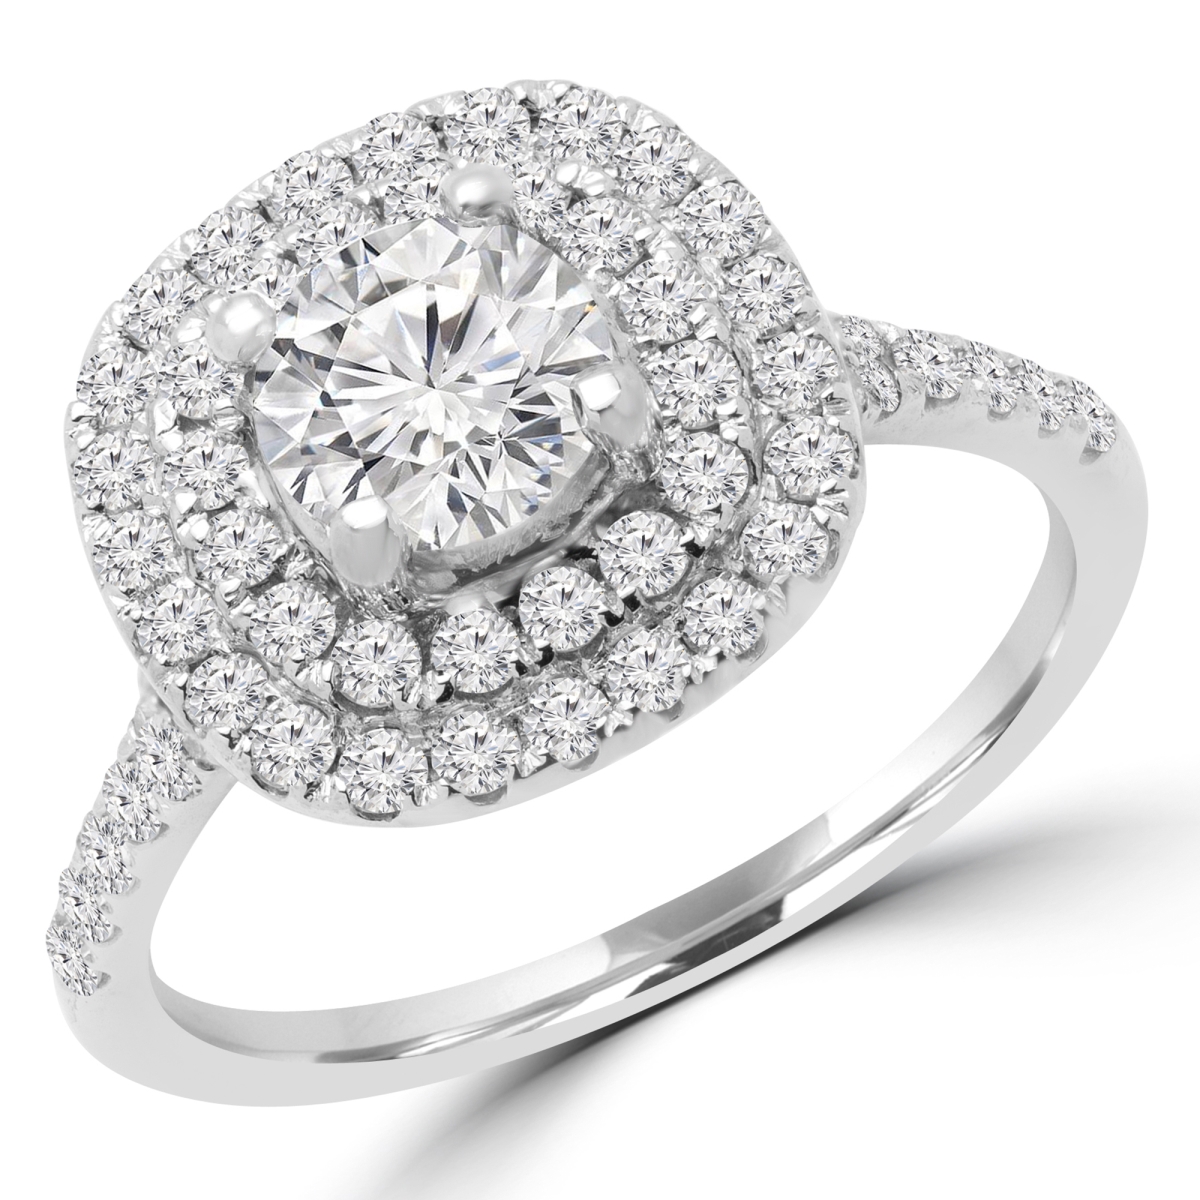 Picture of Majesty Diamonds MD170293-8 1.4 CTW Round Diamond Double Halo Engagement Ring in 14K White Gold - Size 8